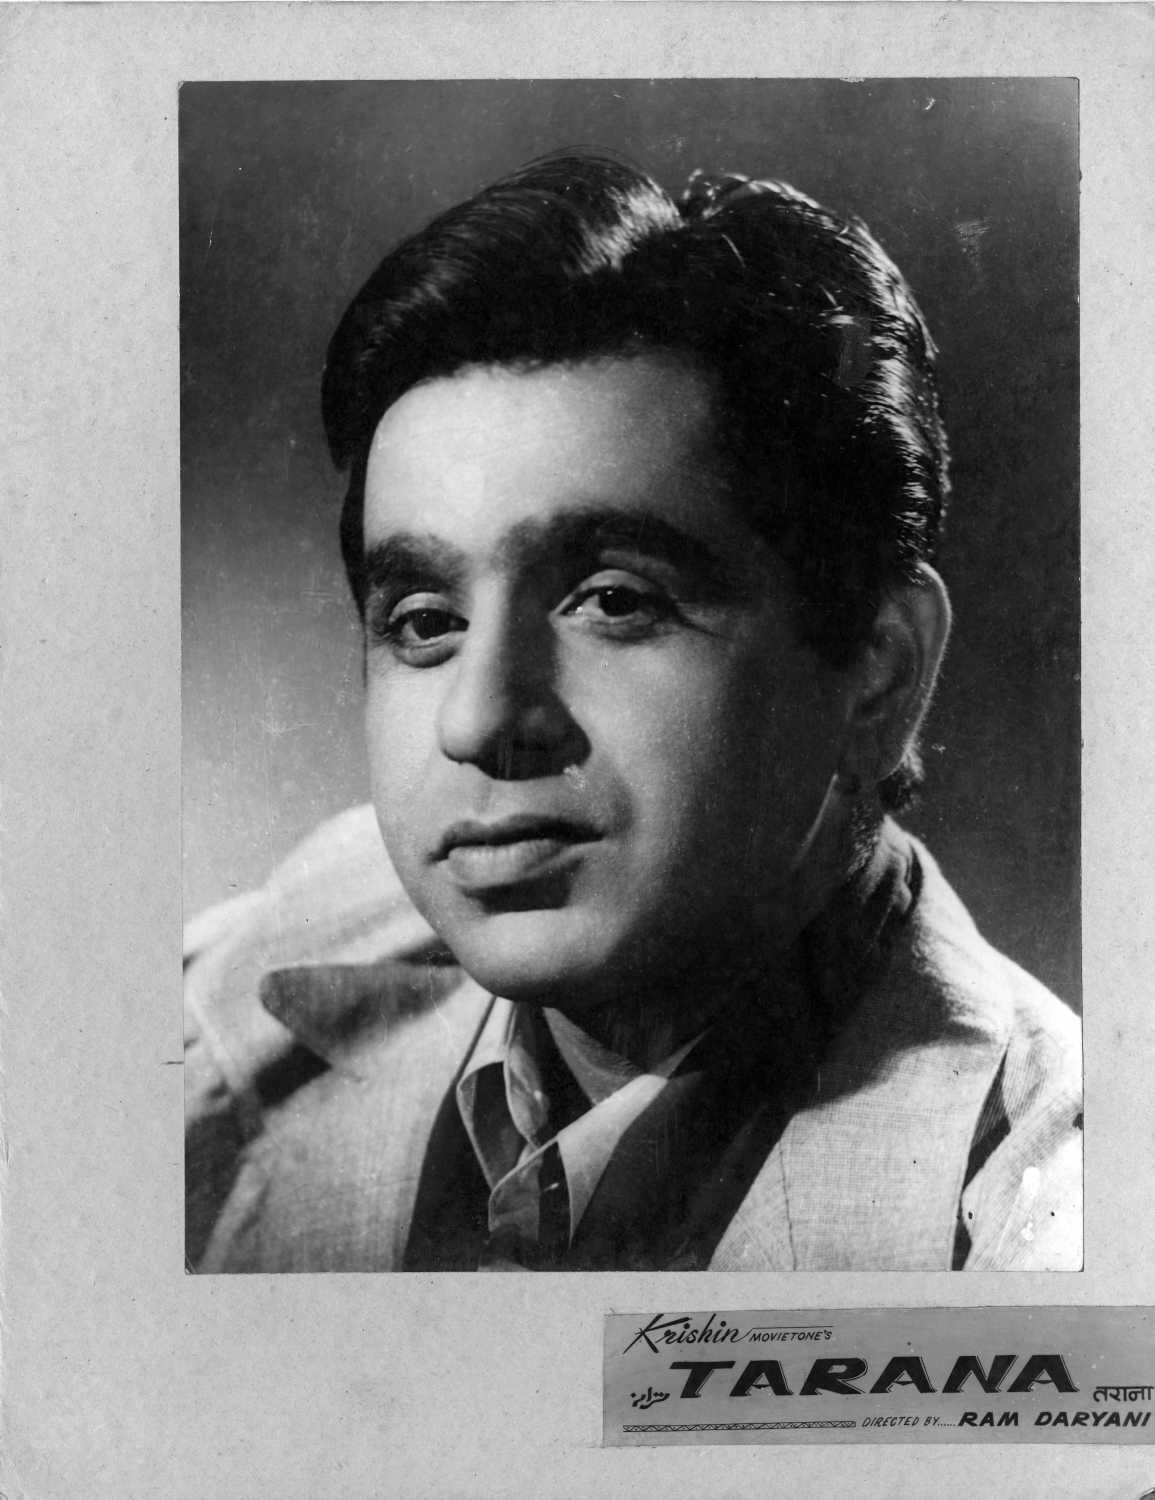 Timeless Indian Melodies - Classic on screen pair Dilip Kumar and Waheeda  Rehman, both powerhouse performers. | Facebook